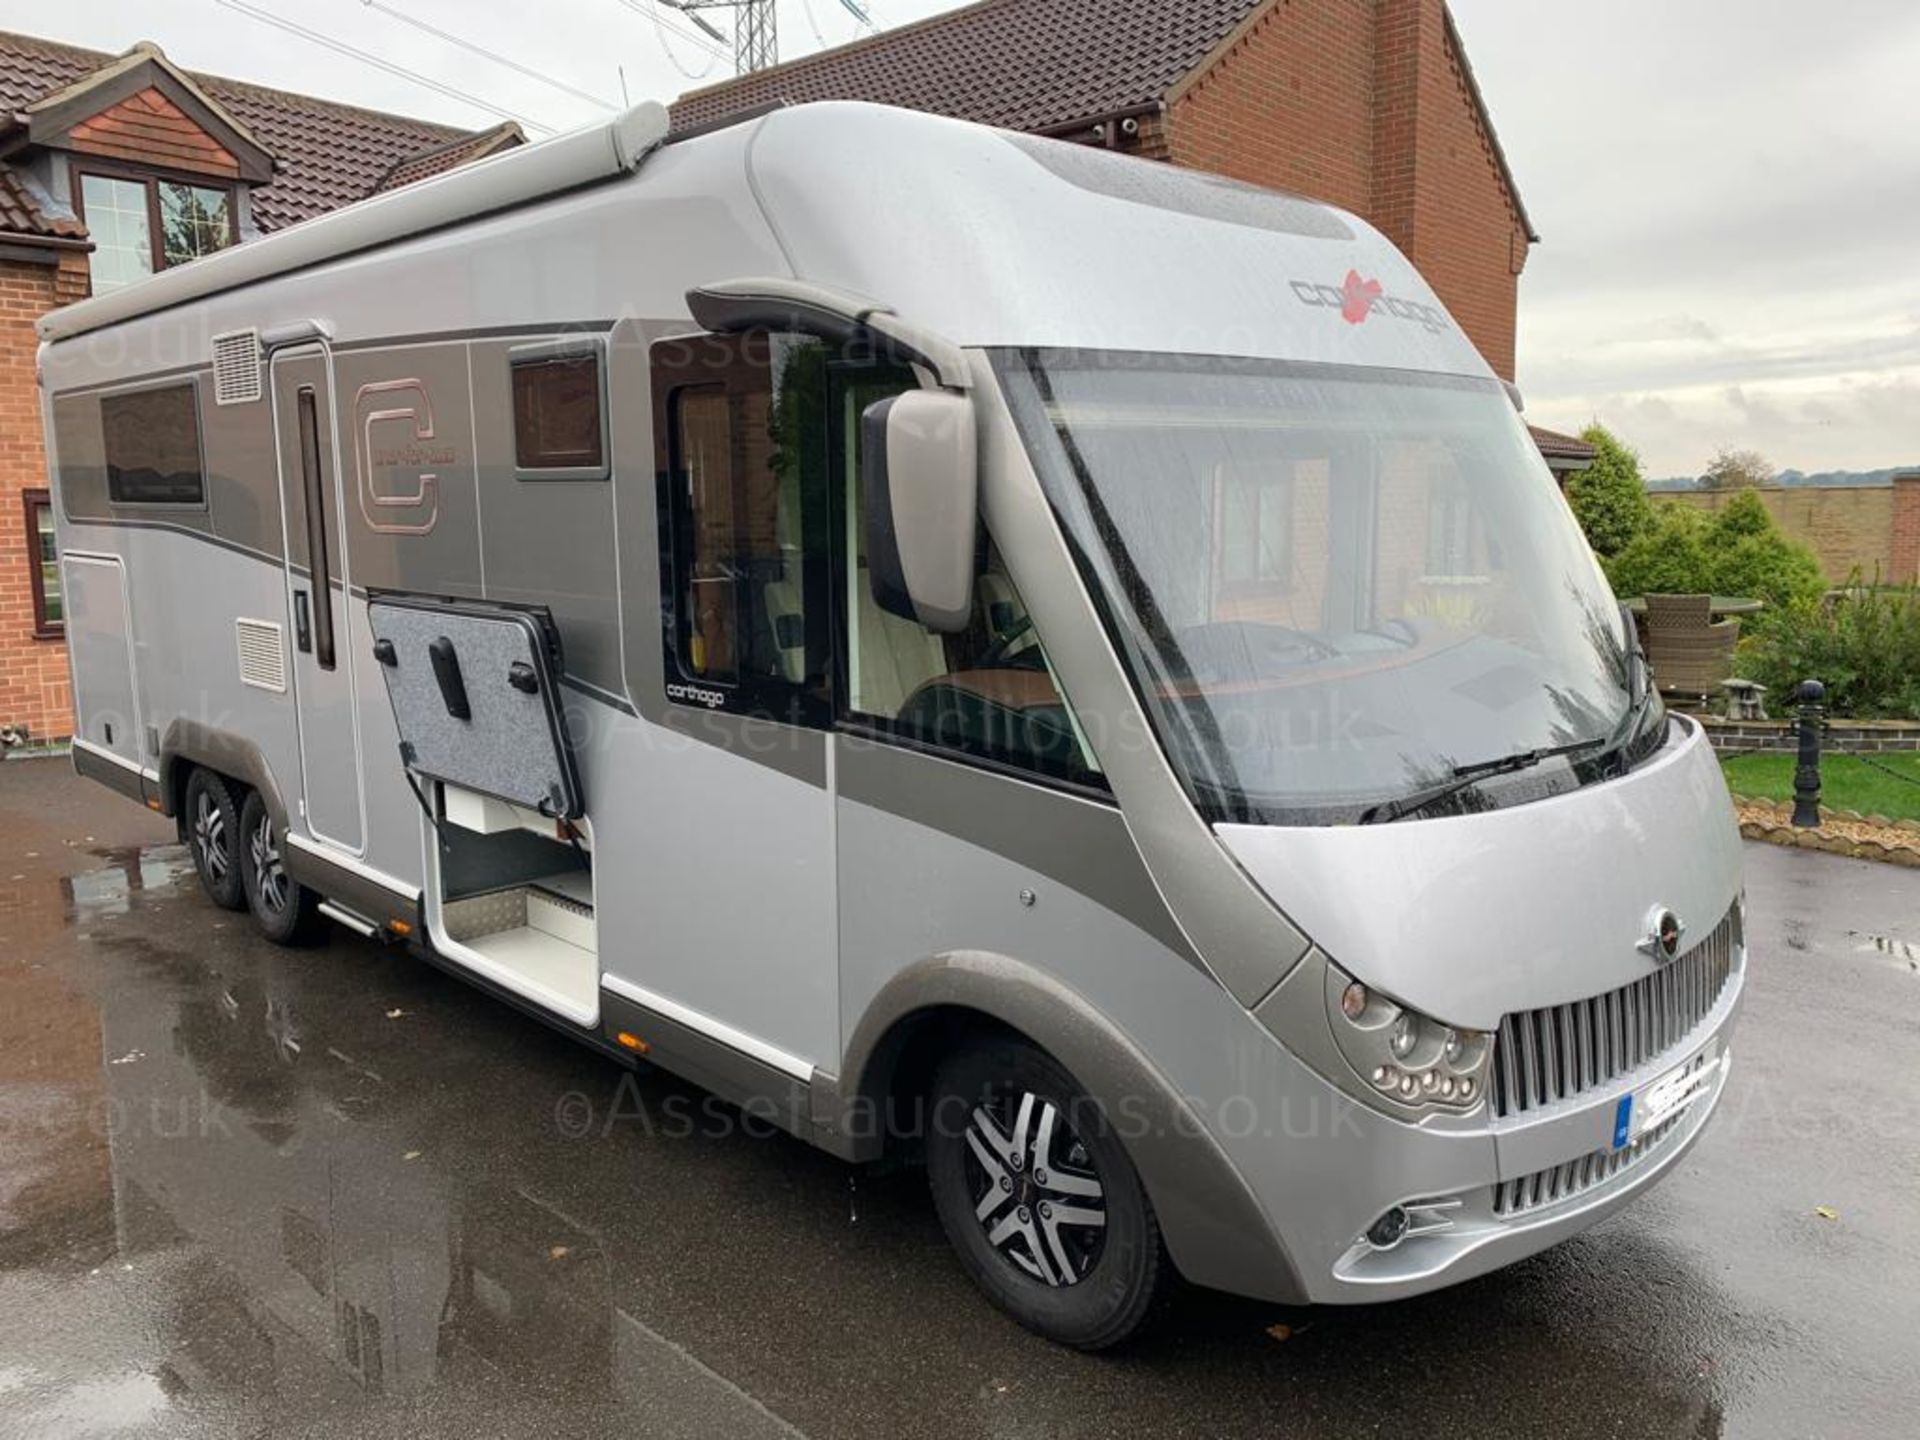 2020 CARTHAGO LINER-FOR-TWO 53L MOTORHOME, SHOWING 4529 MILES, MINT CONDITION *NO VAT*